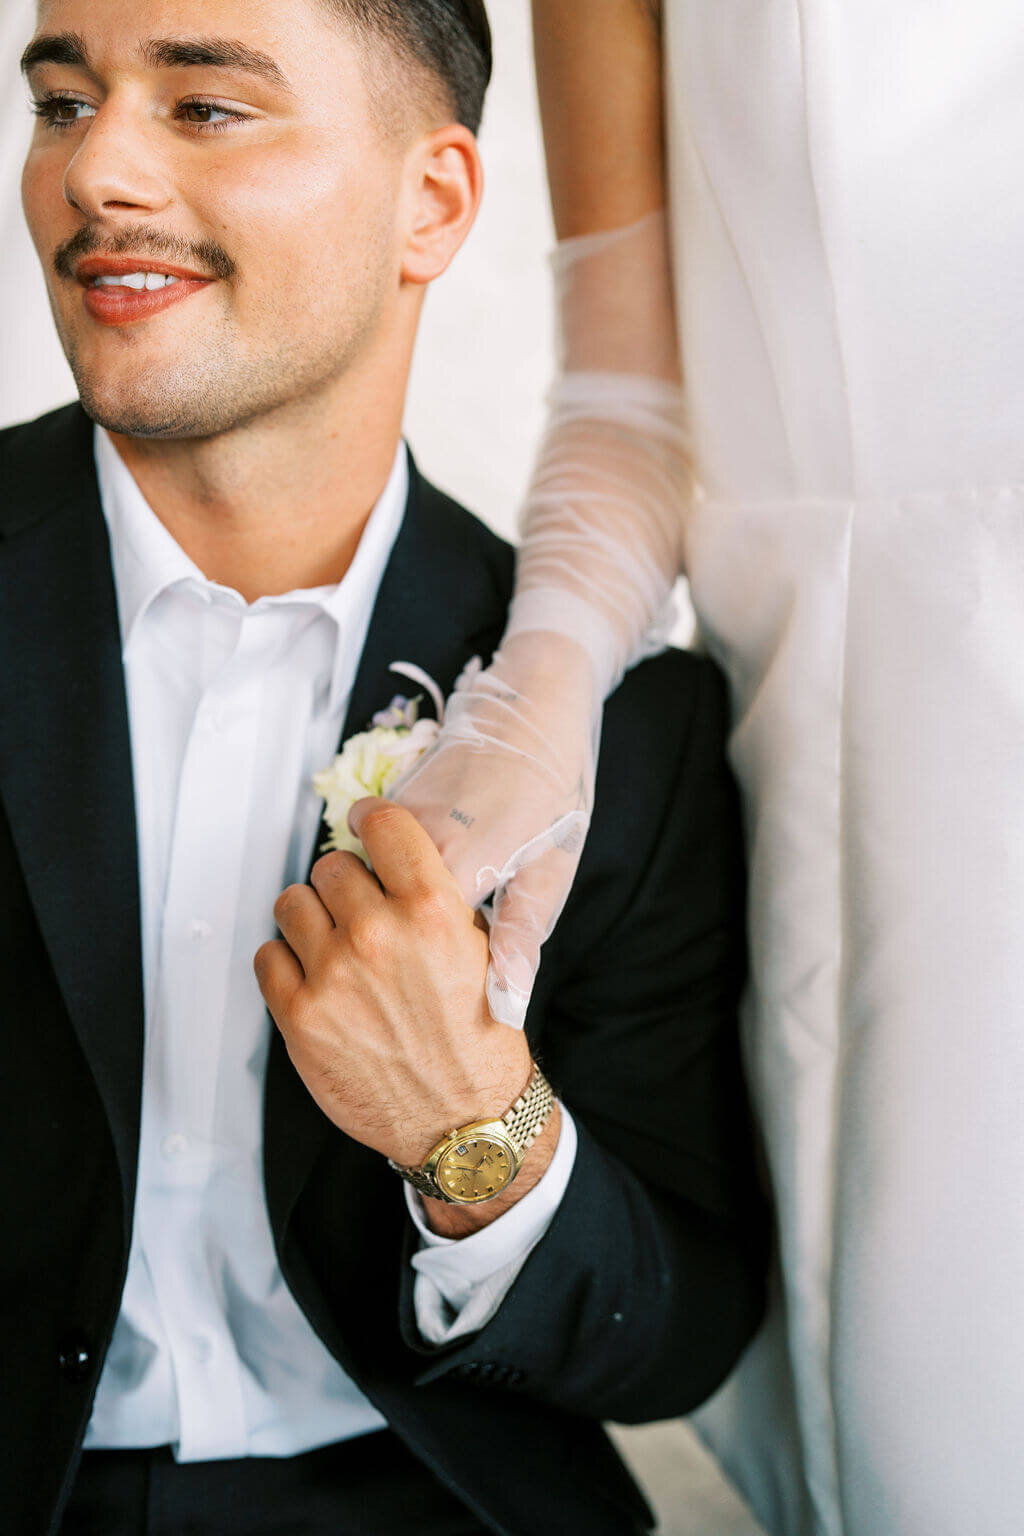 Detail picture of a couple holding hands on their wedding day